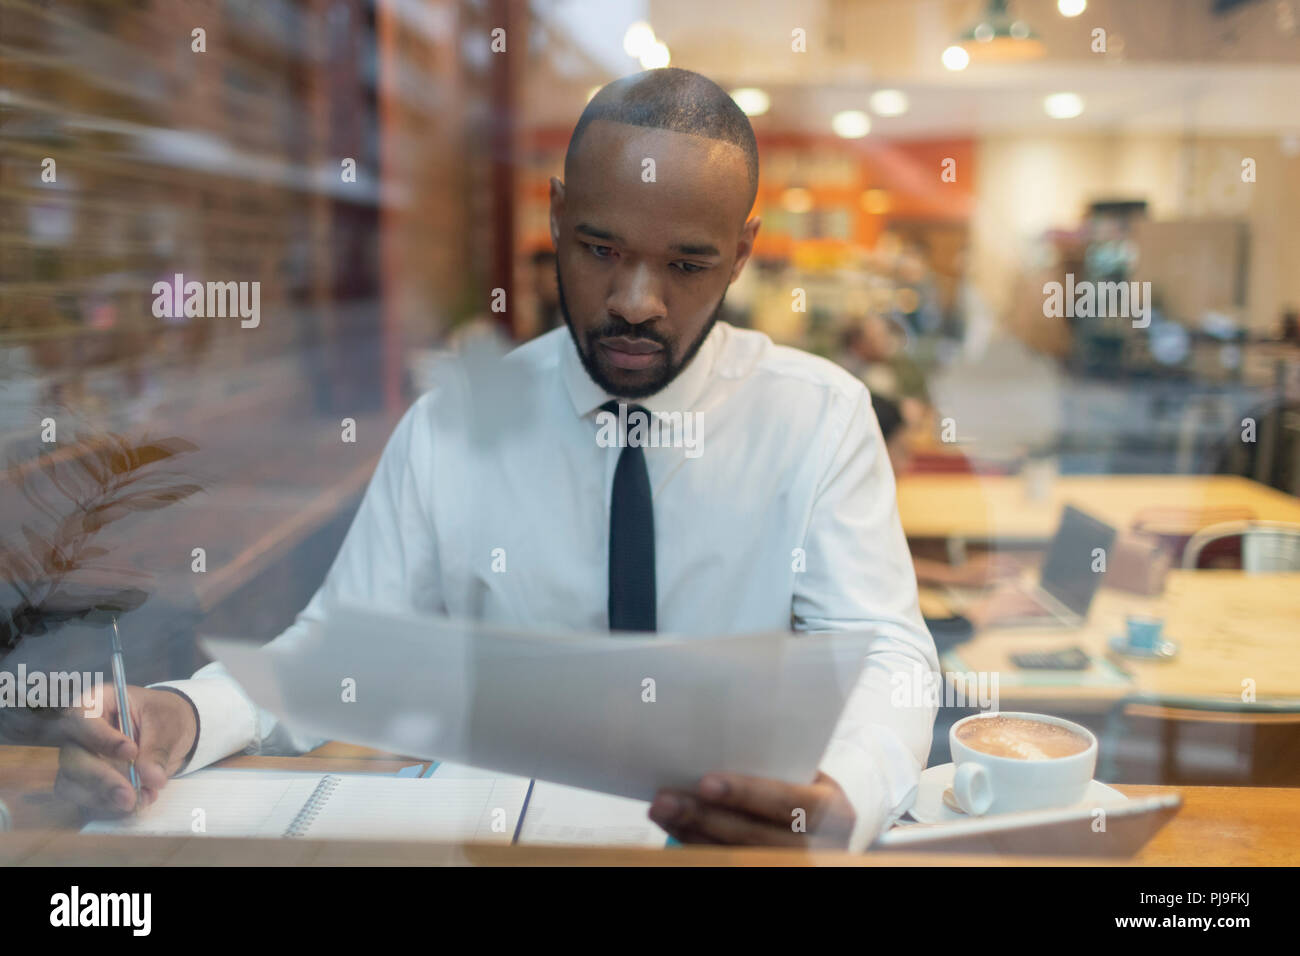 Focused businessman reviewing paperwork, working in cafe window Stock Photo